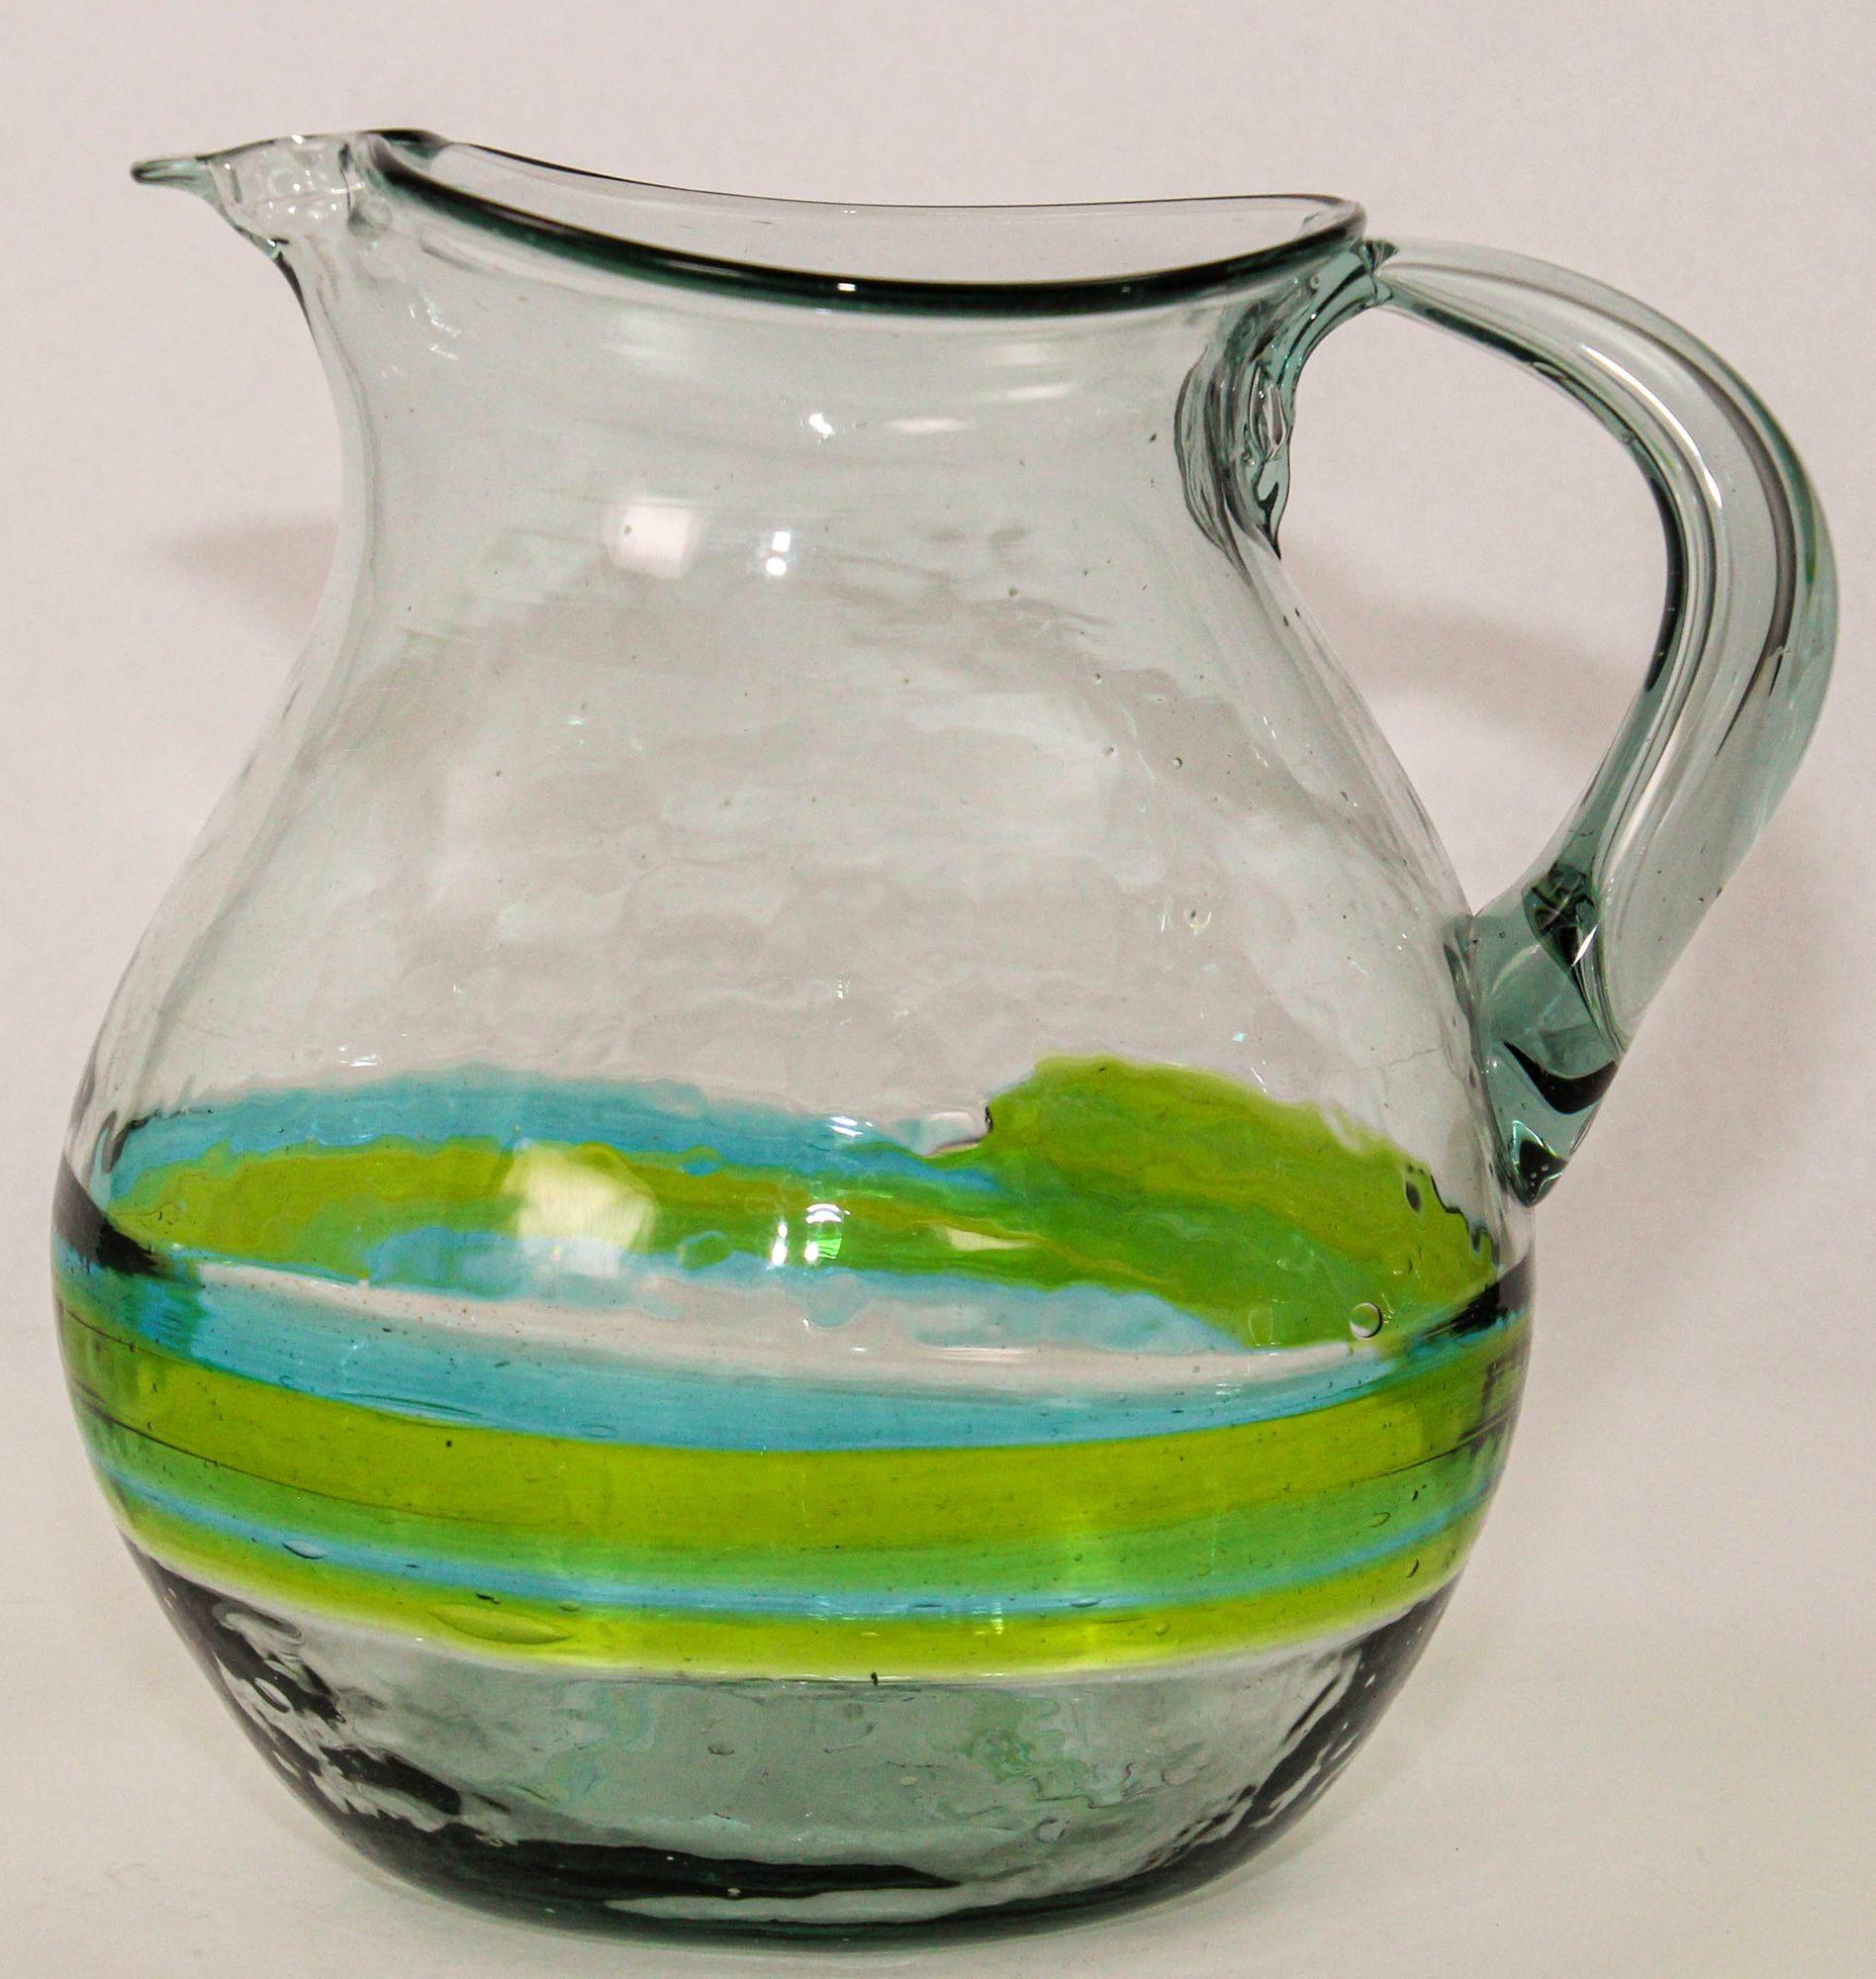 Hand blown Glass Pitcher With Green and Blue Swirl Design Mexico 1970s.
Handcrafted blown art glass Pitcher perfect for summertime iced tea or lemonade or your favorite cocktail.
The pitcher has an applied clear handle and is mouth blown with green